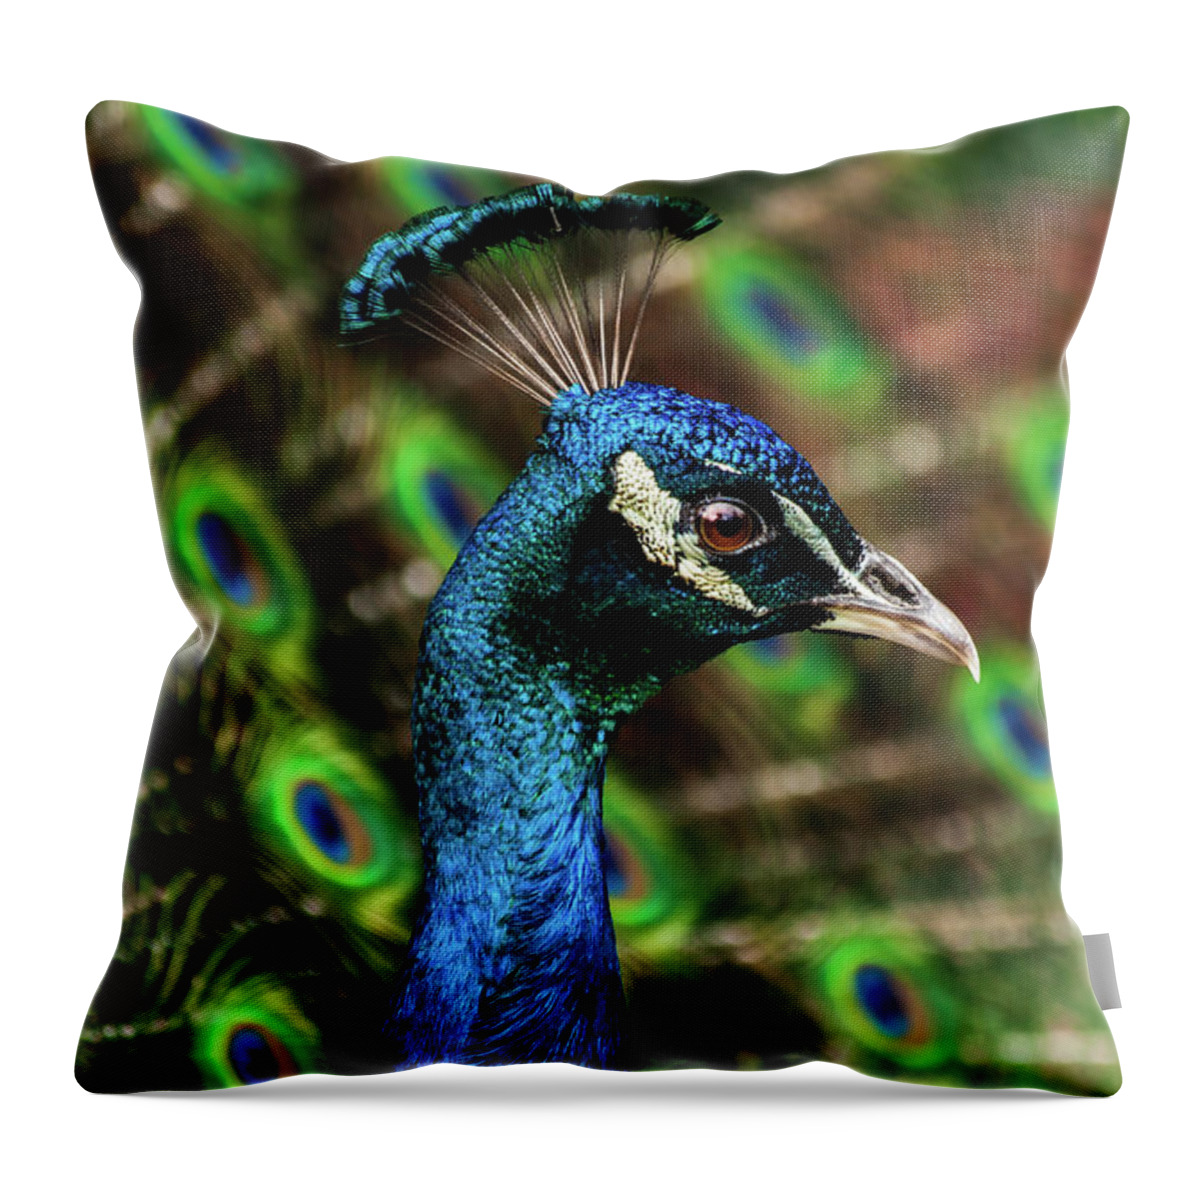 Animal Themes Throw Pillow featuring the photograph Male Peacock by Keith R. Allen